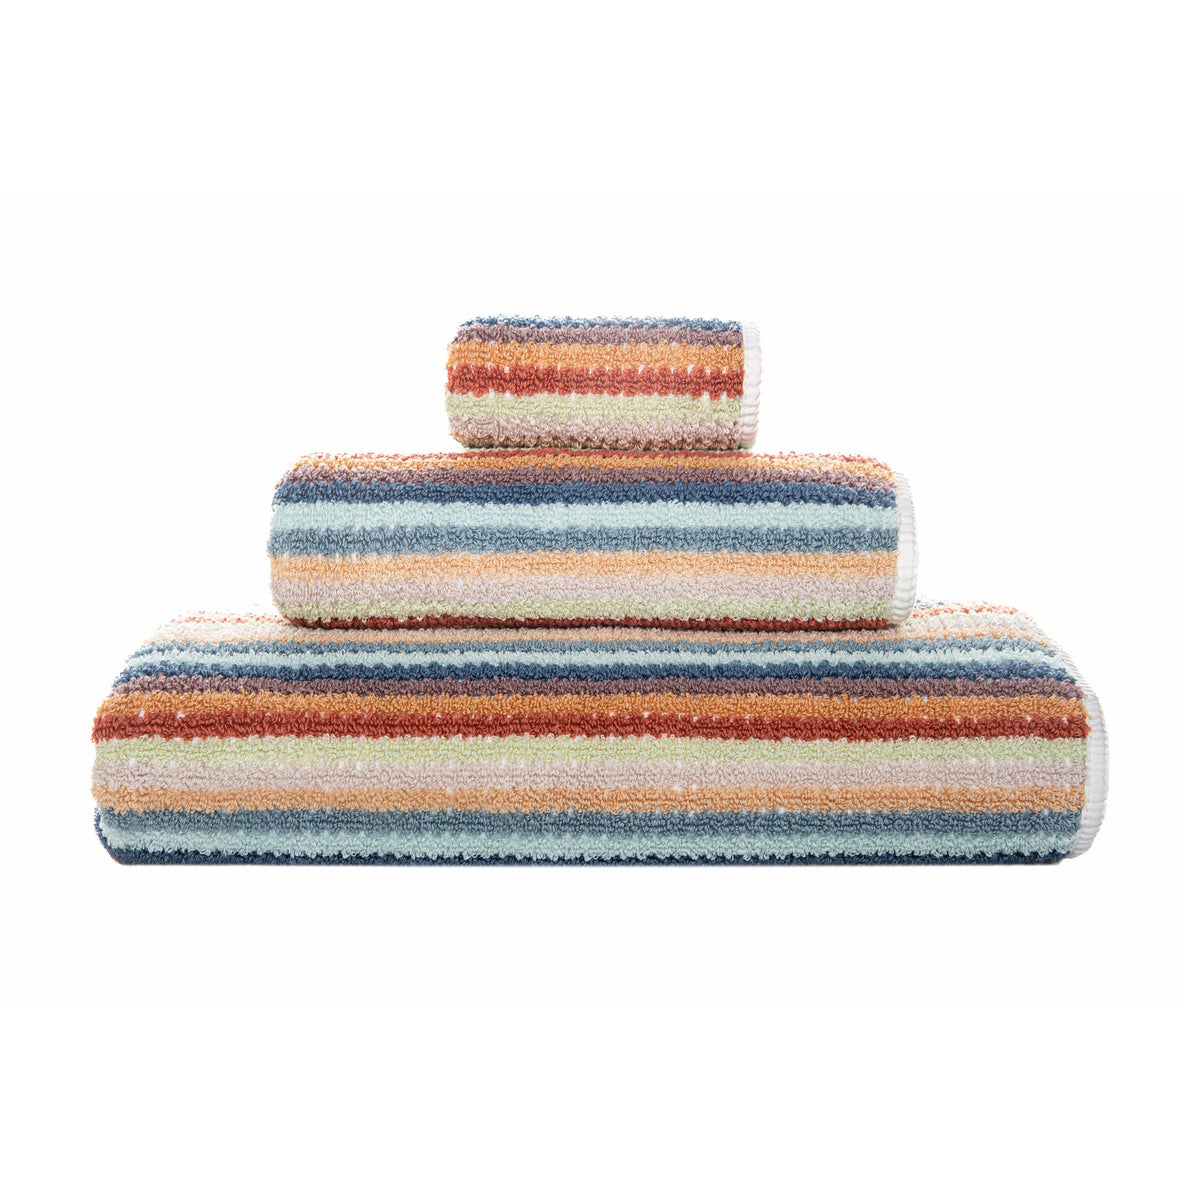 Stack of Graccioza Lollypop Bath Towels Against White Background in Color Terracota